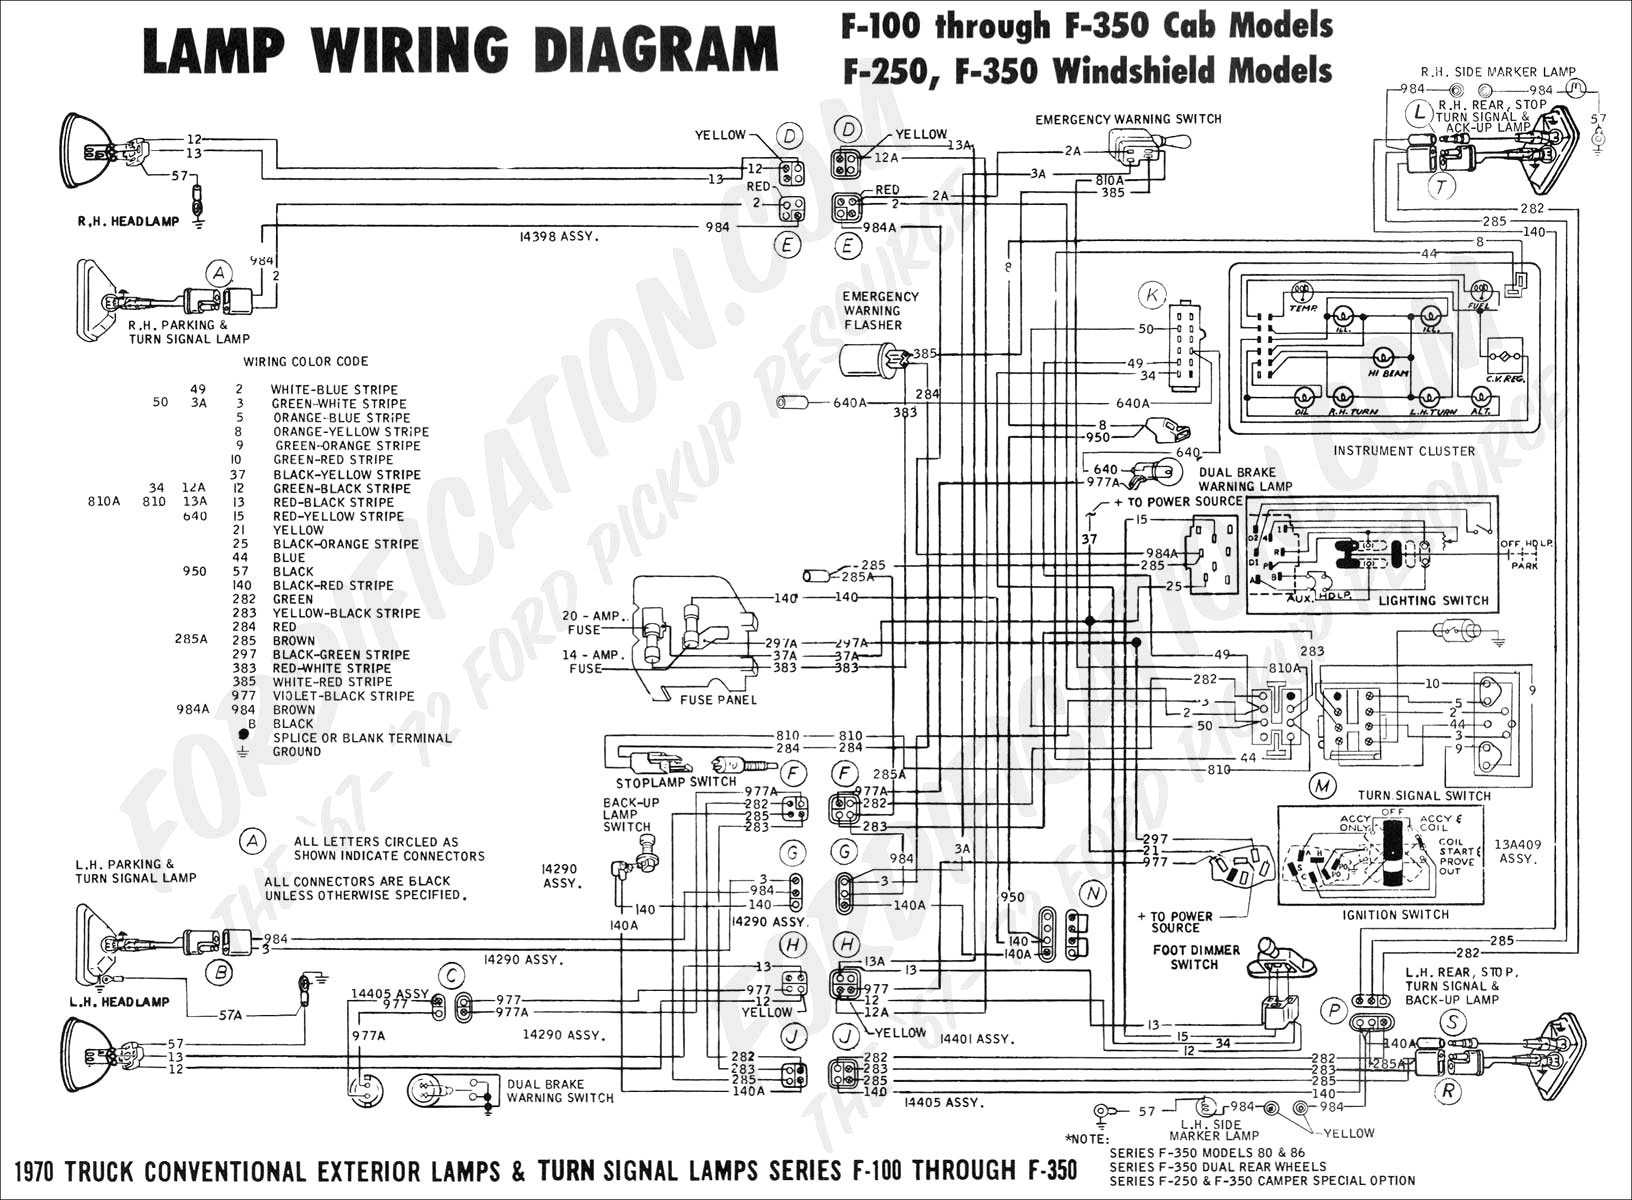 Lutron Diva 3 Way Dimmer Wiring Diagram Reference Part 22 Wiring Diagram Electrical Wiring Circuit